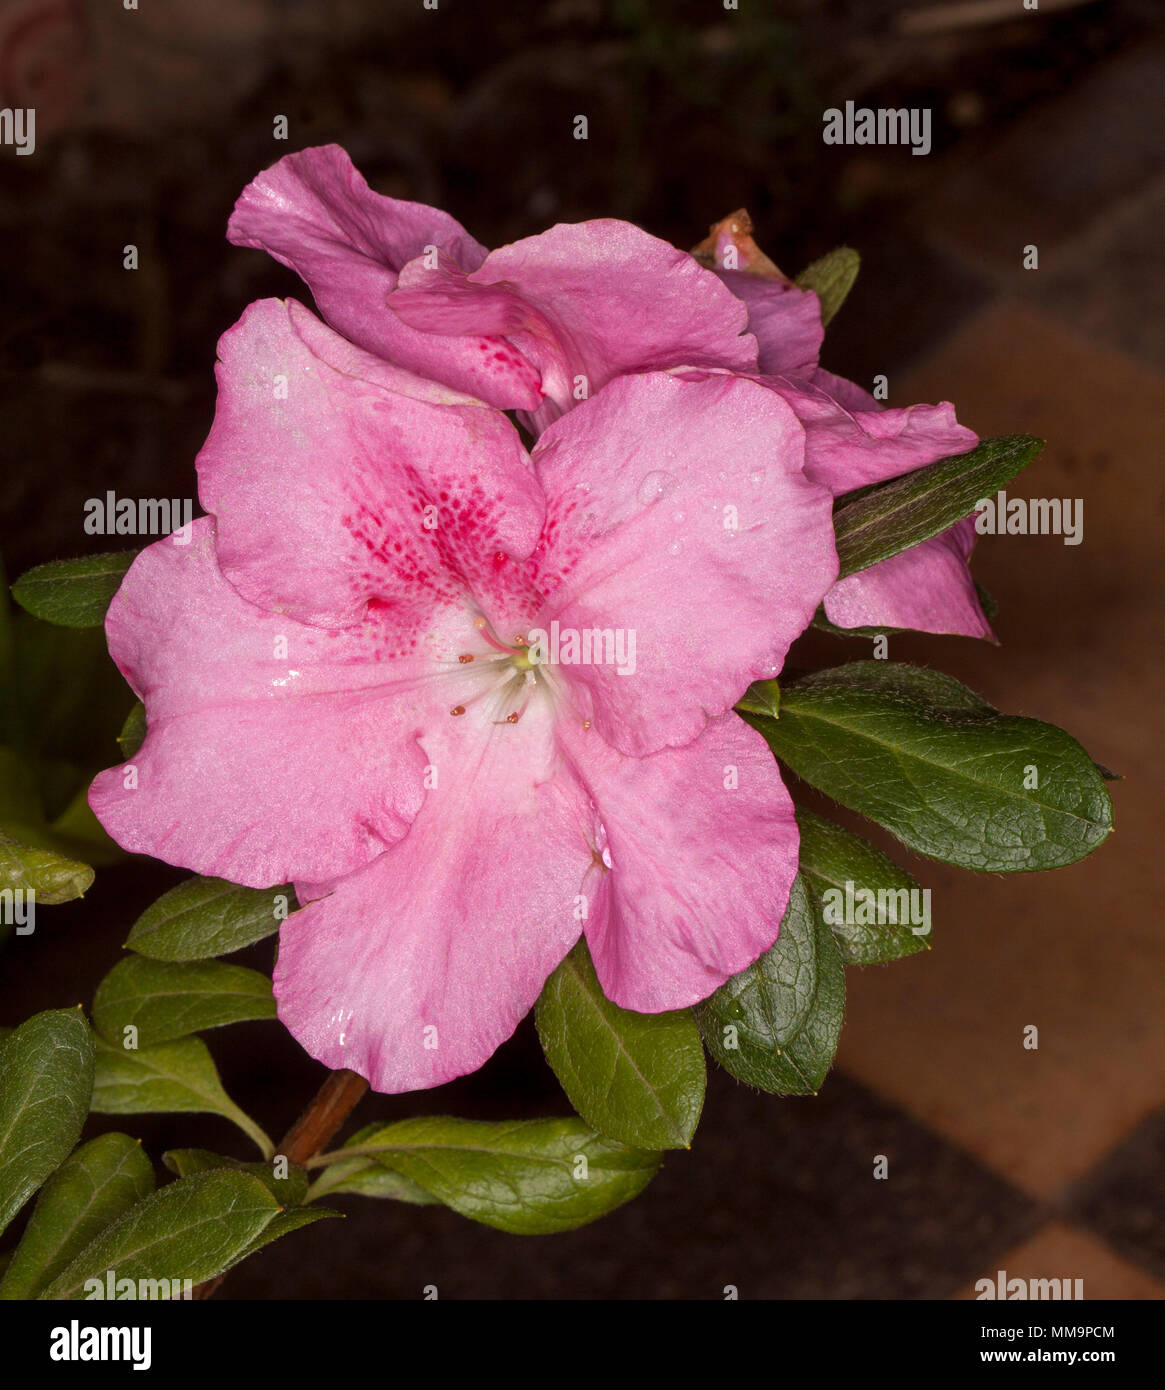 Large bright pink flower and dark green leaves of Azalea indica 'Pink Dream' against dark background Stock Photo